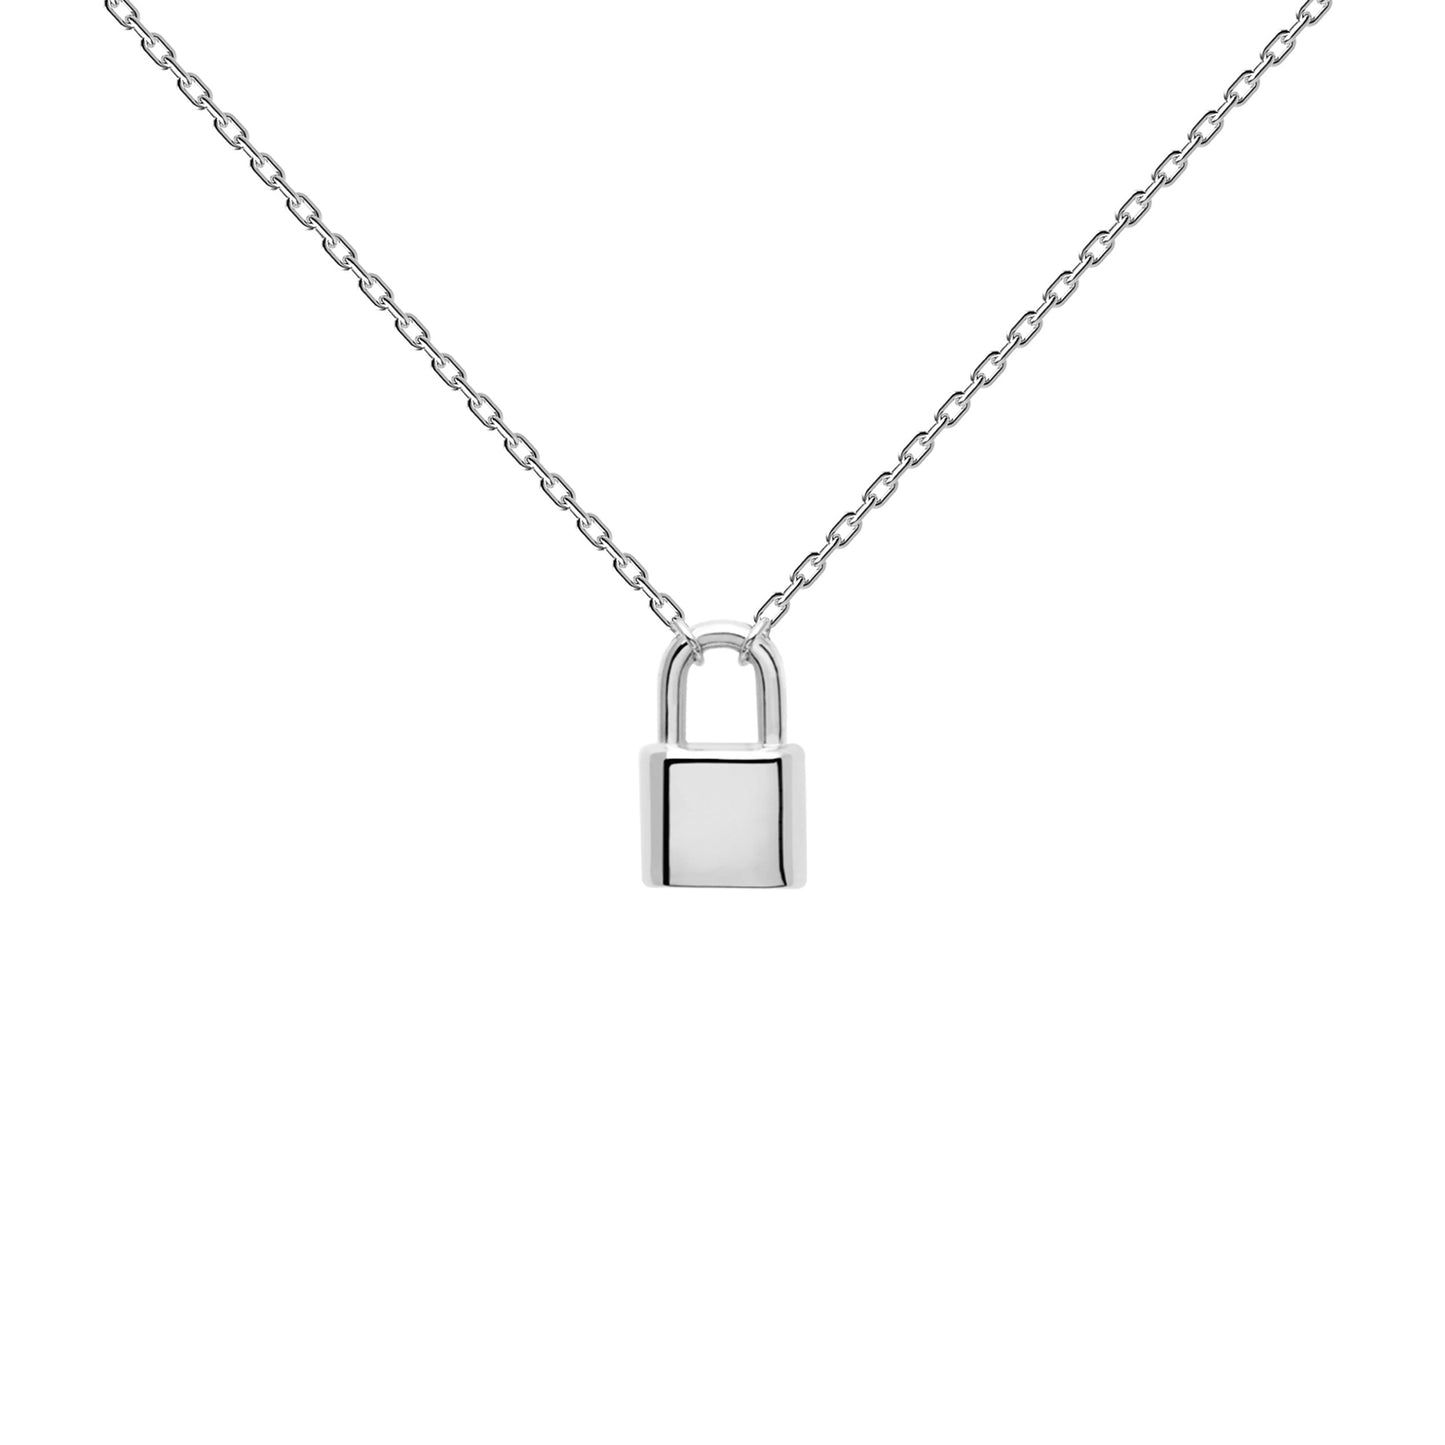 PDPAOLA Sterling Silver Lock Charm Necklace